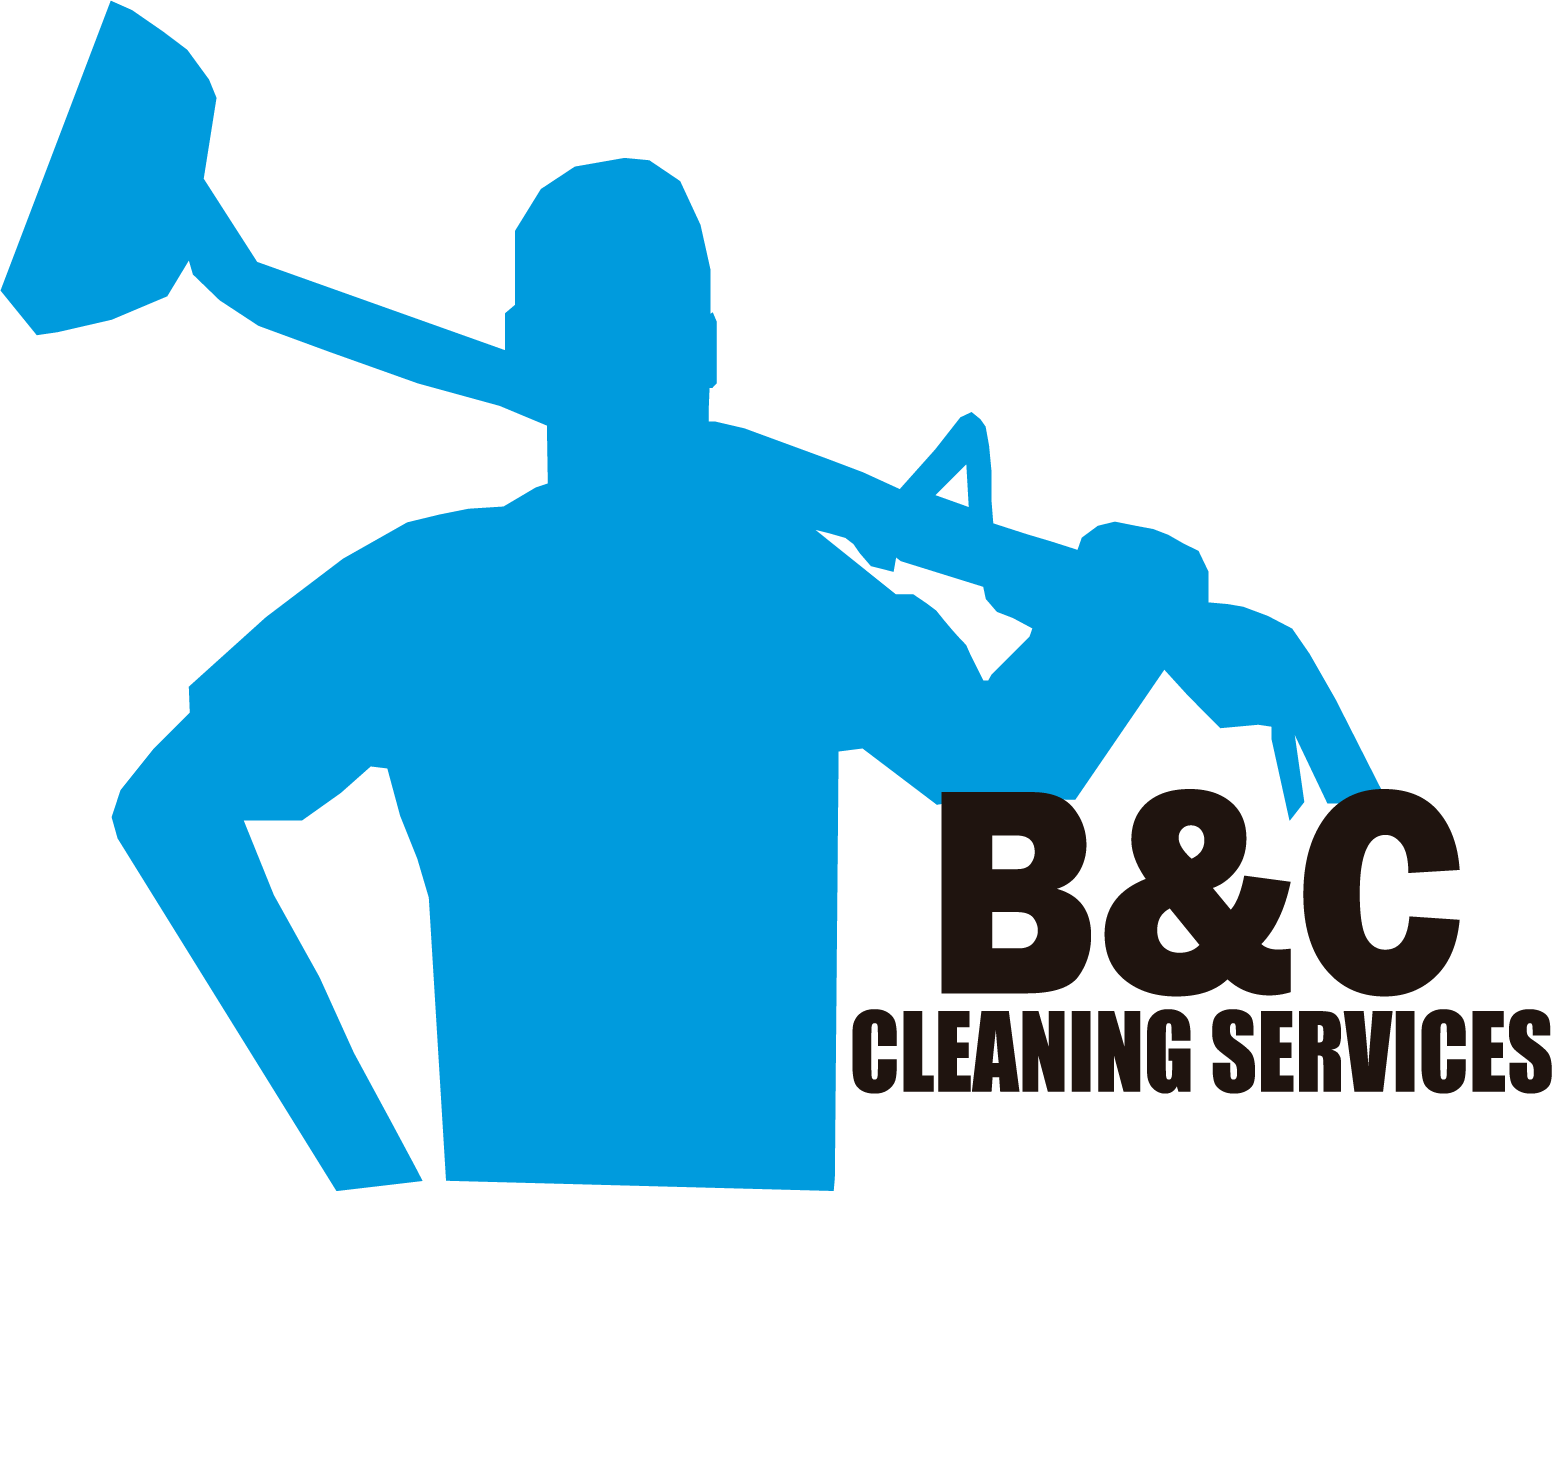 B&C Cleaning Services